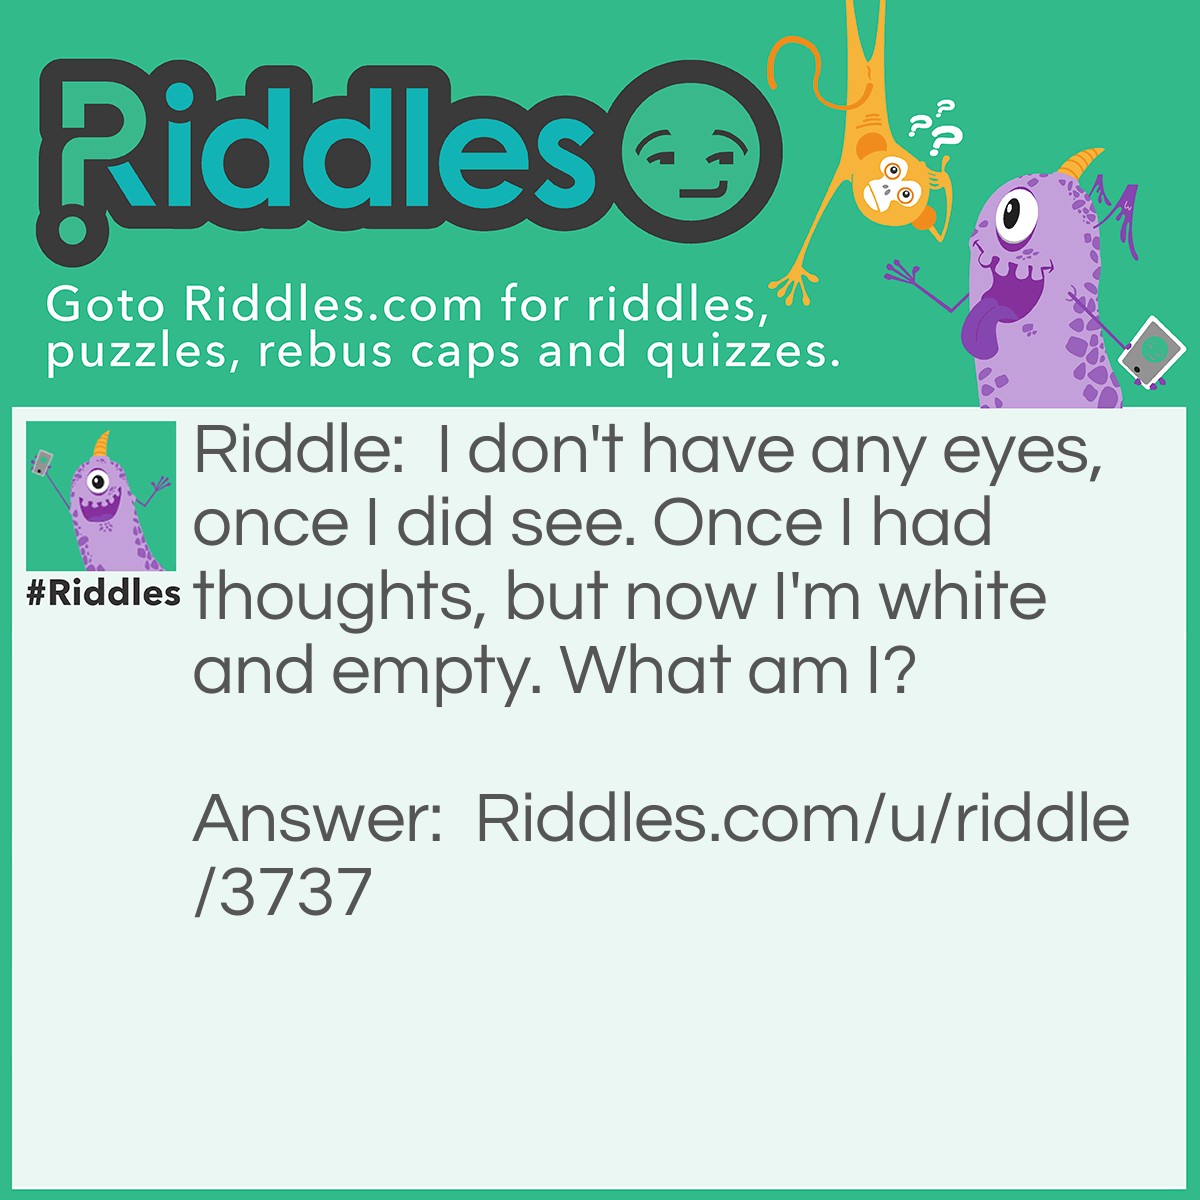 Riddle: I don't have any eyes, once I did see. Once I had thoughts, but now I'm white and empty. What am I? Answer: A skull.